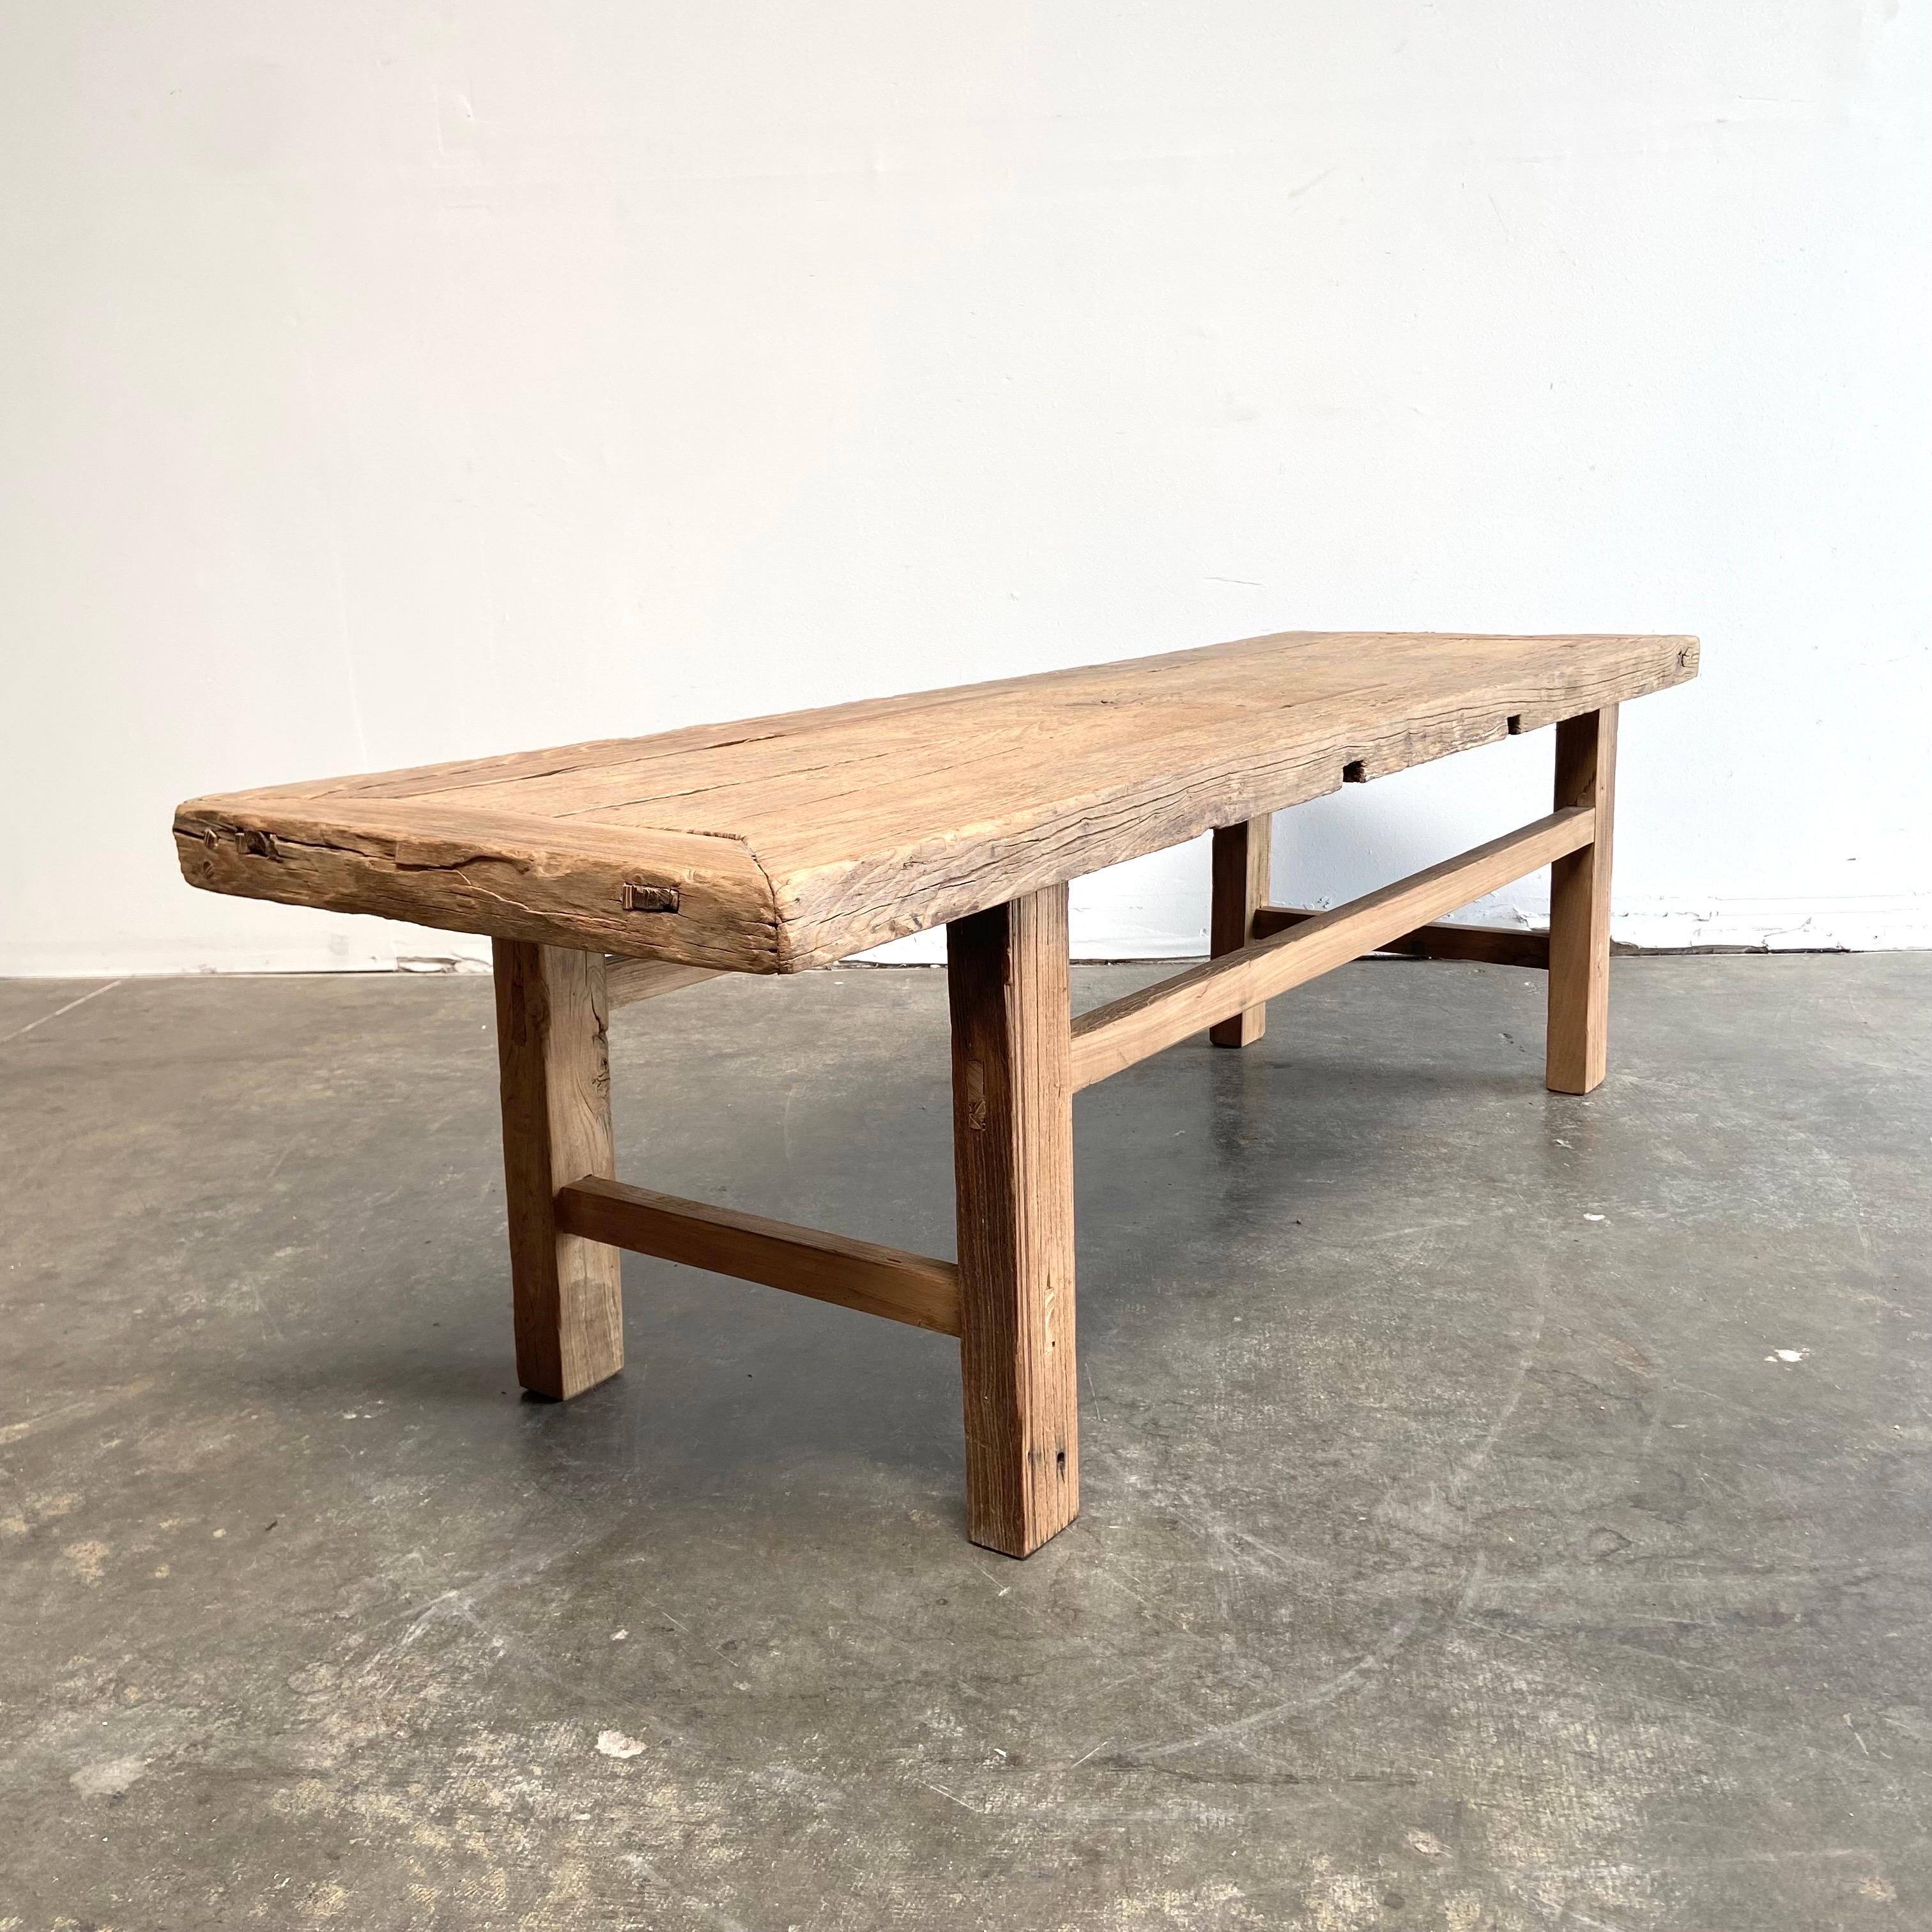 Vintage antique elm wood coffee table with beautiful antique weathered patina top.
These are the real vintage antique elm wood coffee table! Beautiful antique patina, with weathering and age, these are solid and sturdy ready for daily use, use as a